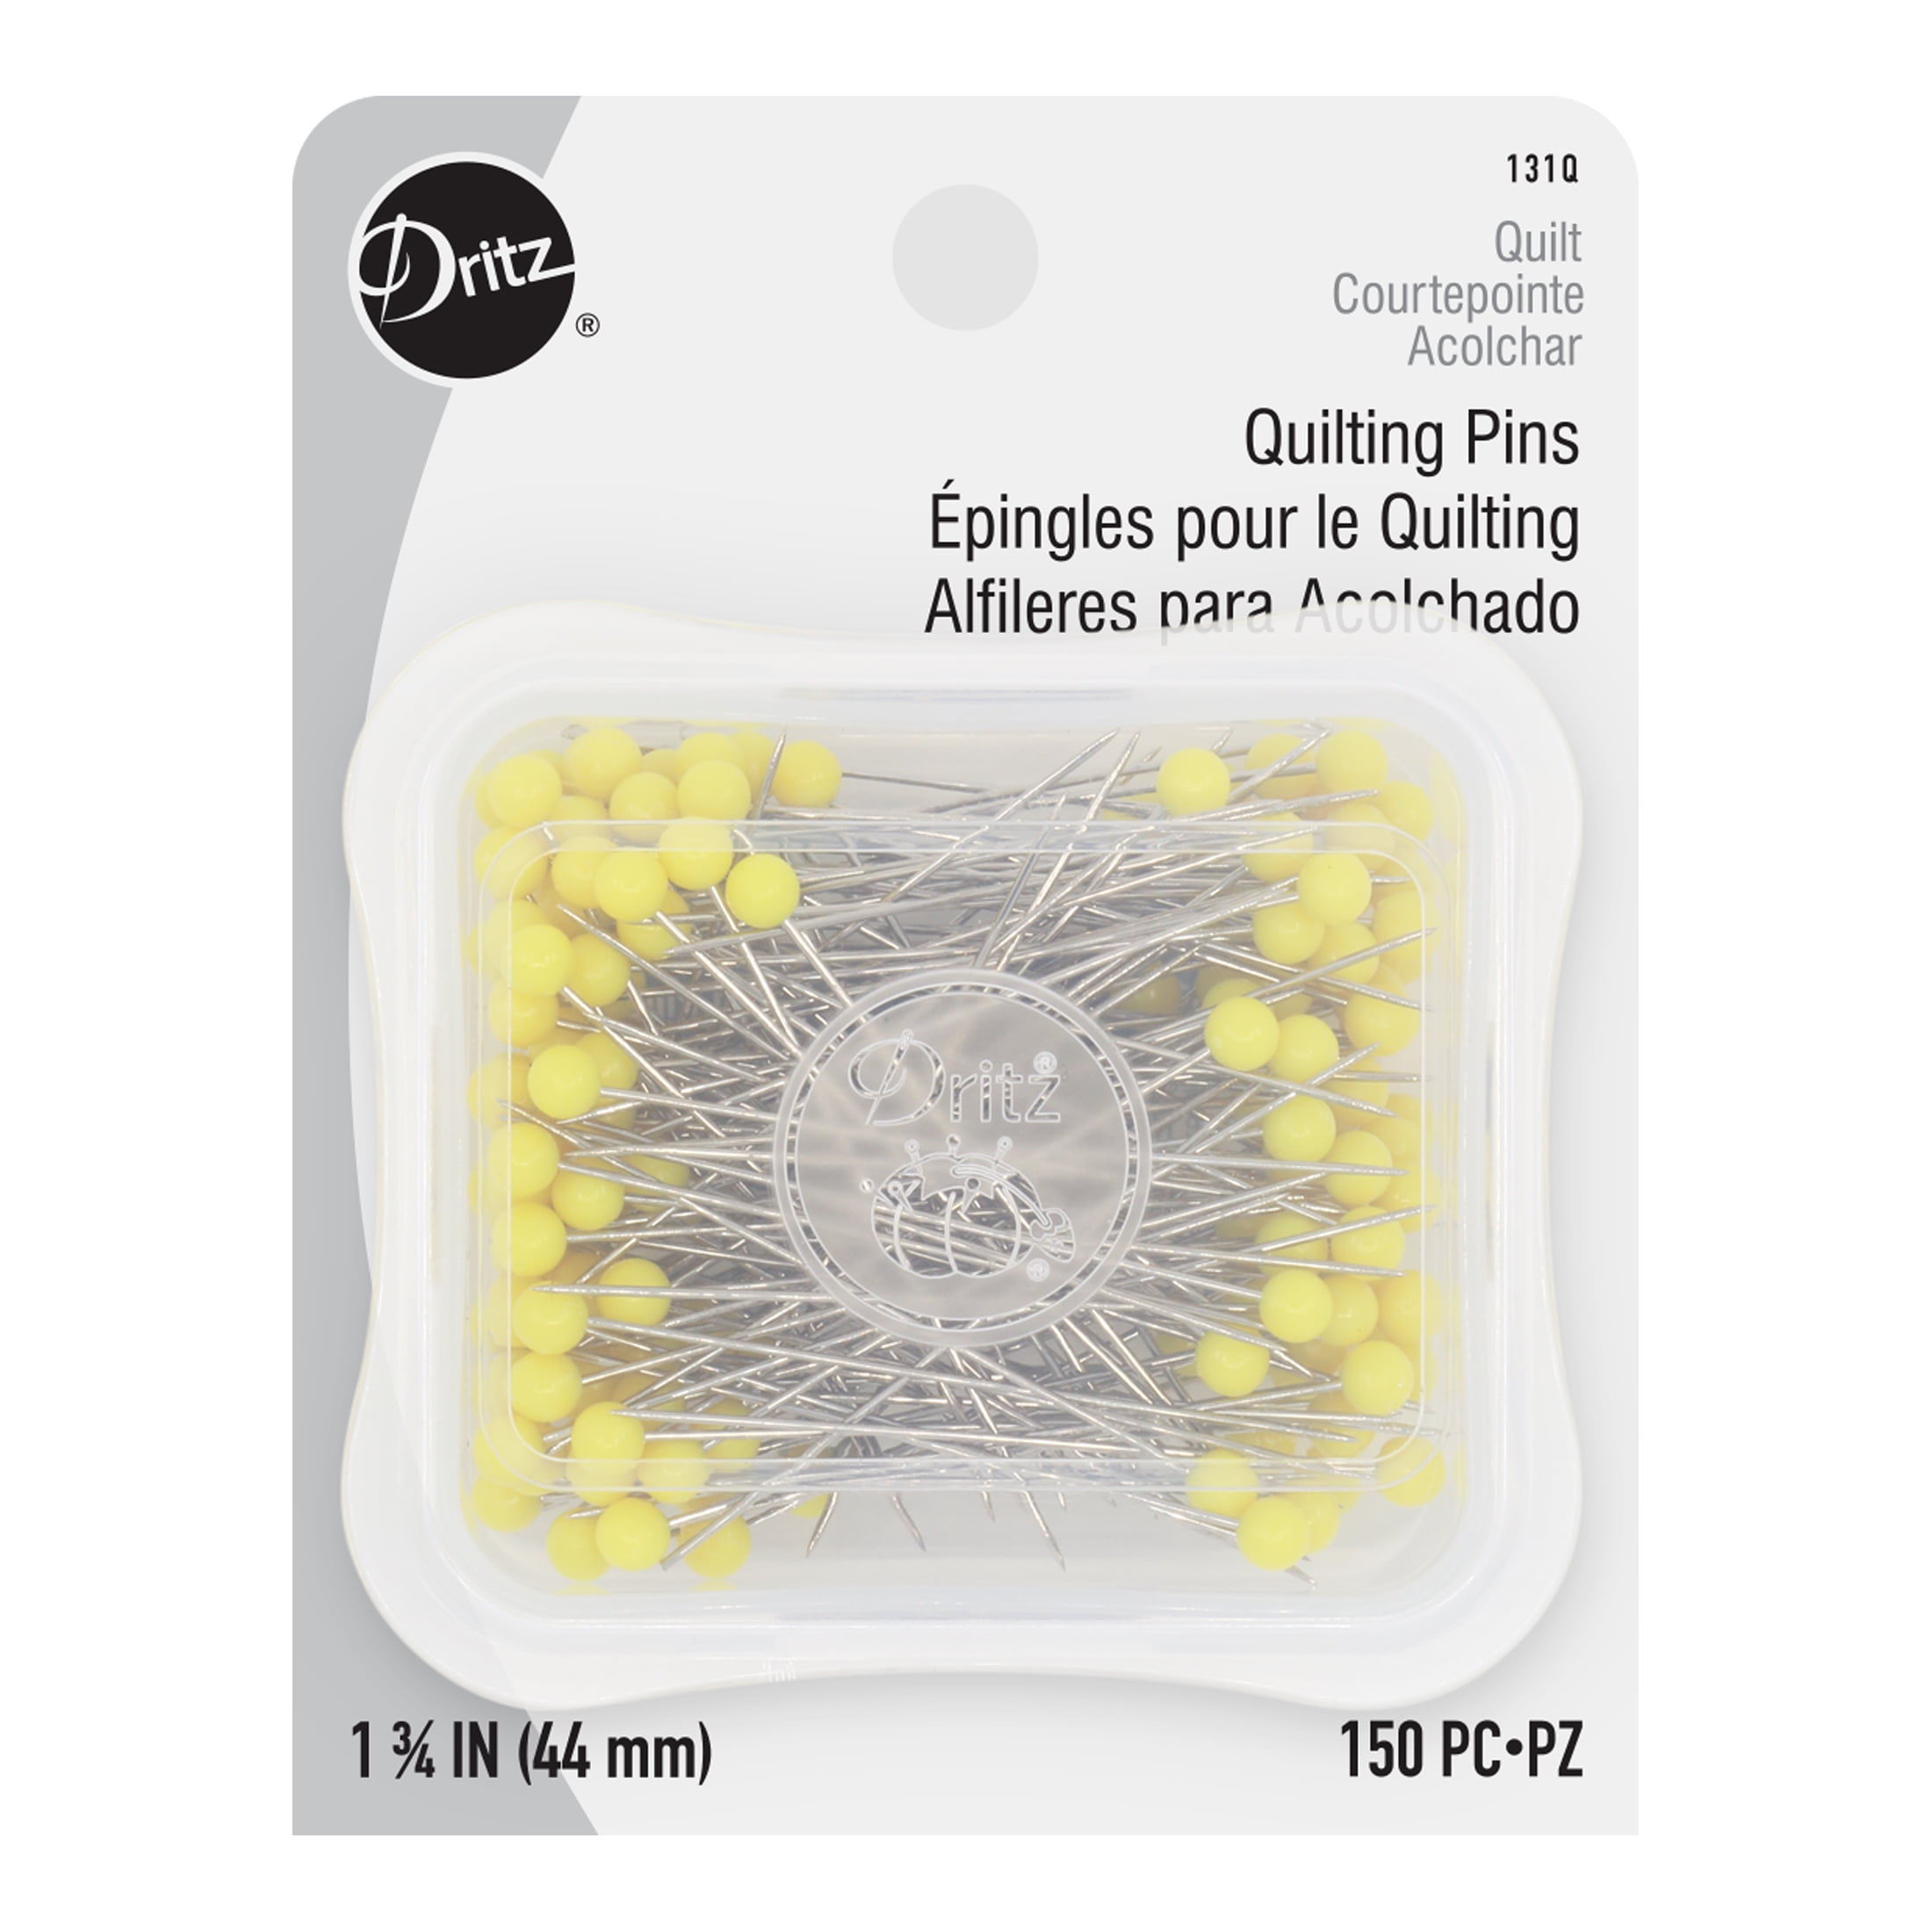 Dritz Quilting Pins, 150 Count